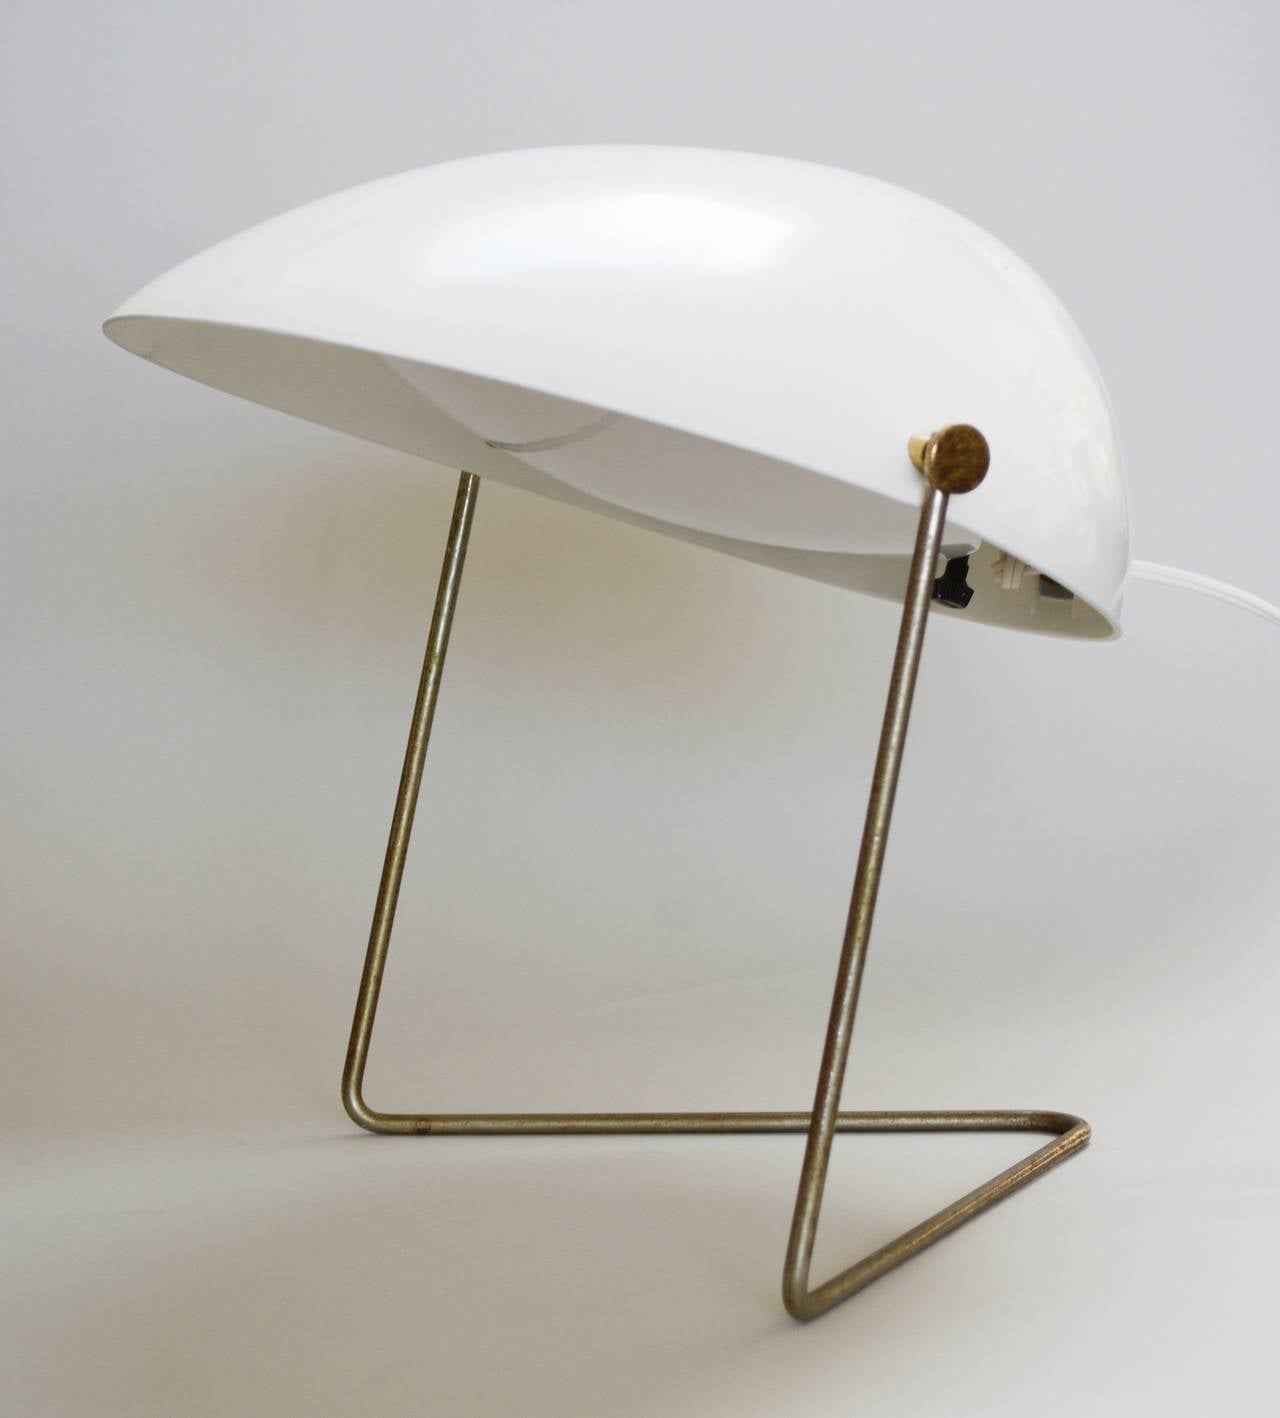 An iconic Gerald Thurston design for Lightolier. The cricket lamp has an adjustable shade and can be hung on a wall as well. The shade of this has been repainted. The metal Stand has some oxidation and wear. The lamp is rewired. The diffuser is a